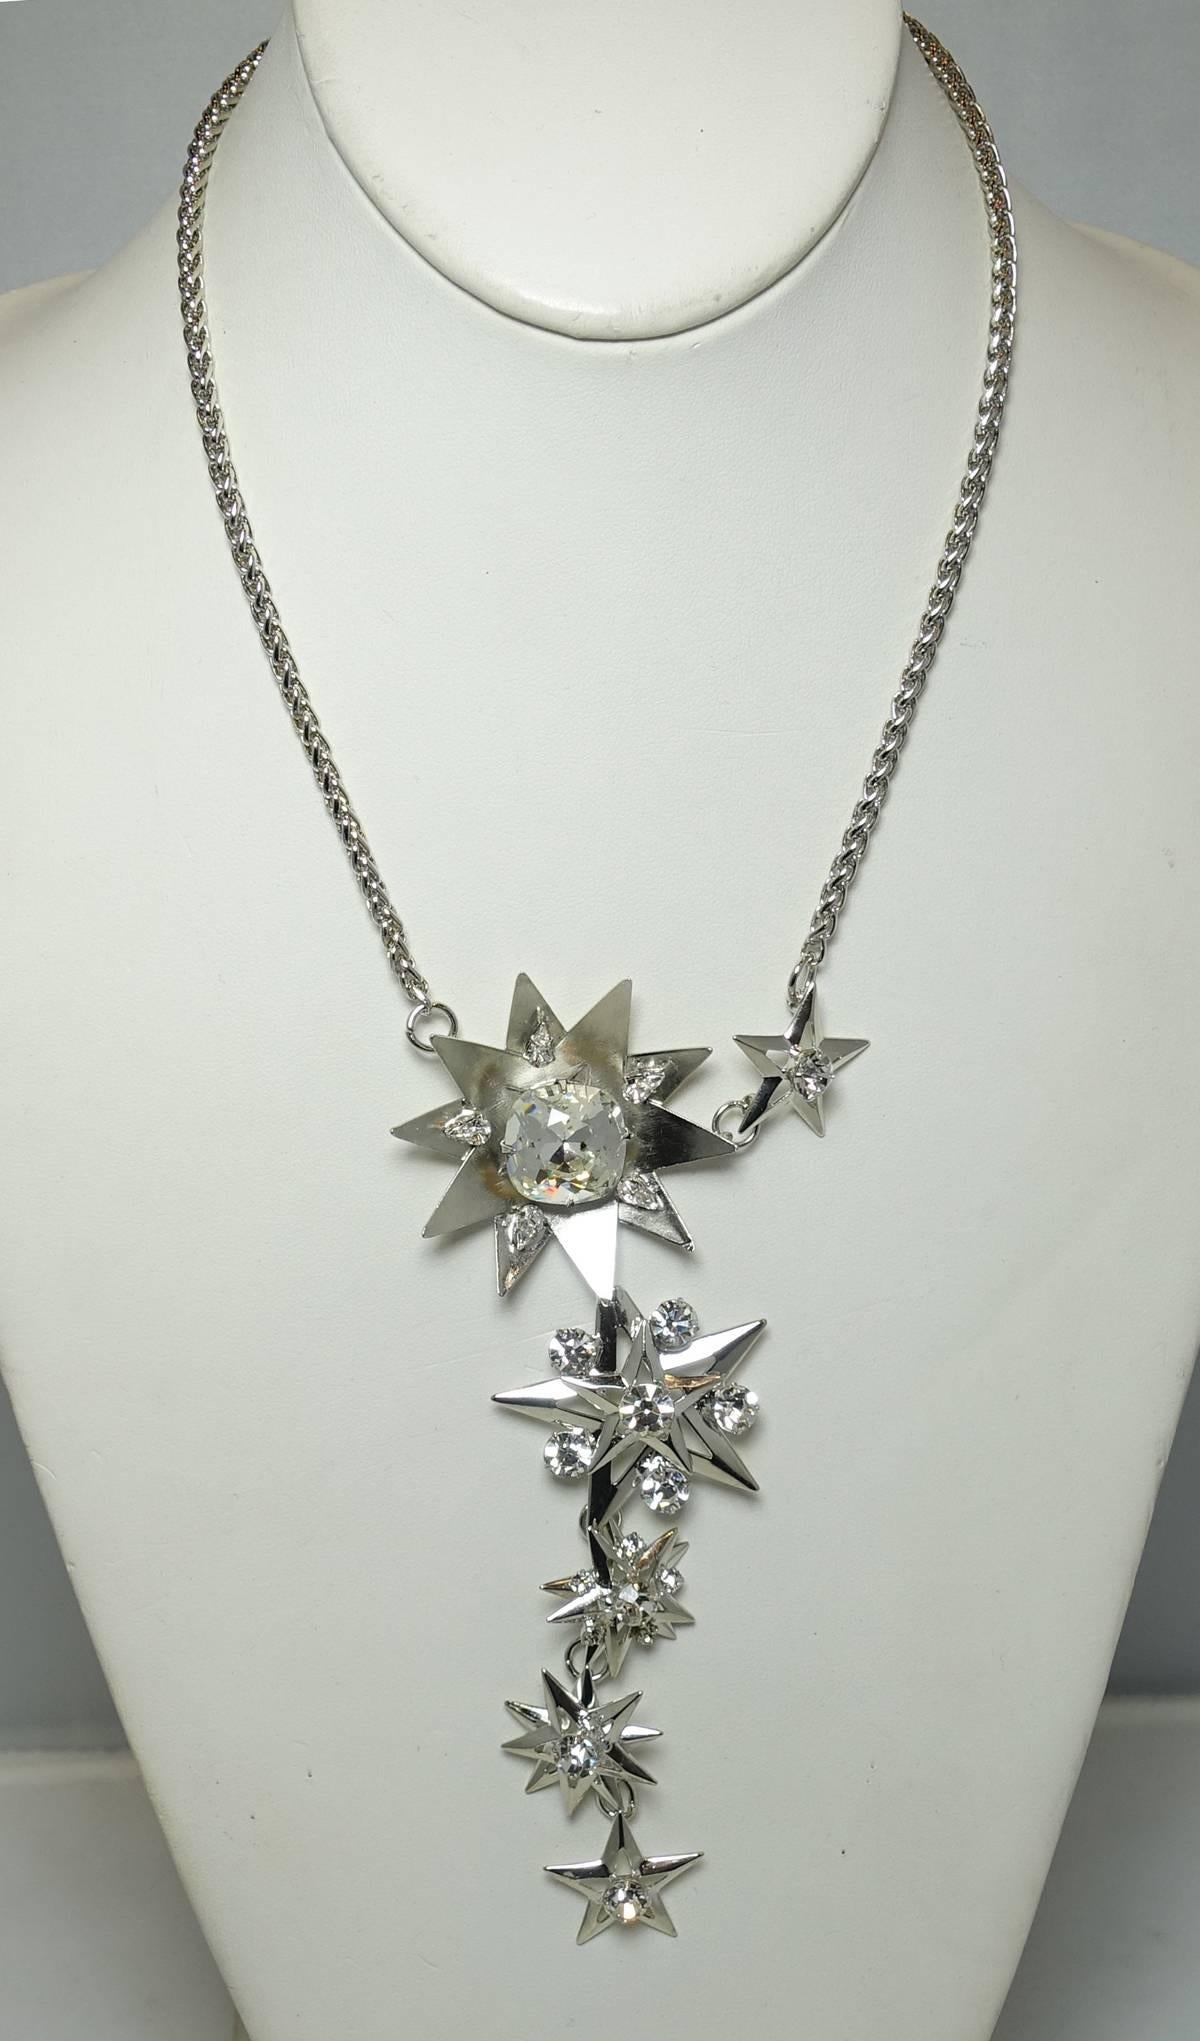 This one-of-a-kind necklace by Robert Sorrell features a floral centerpiece with large crystal accent. There is a star next to it and the necklace has a drop with 4 more stars. All stars are decorated with faceted crystals. This necklace was